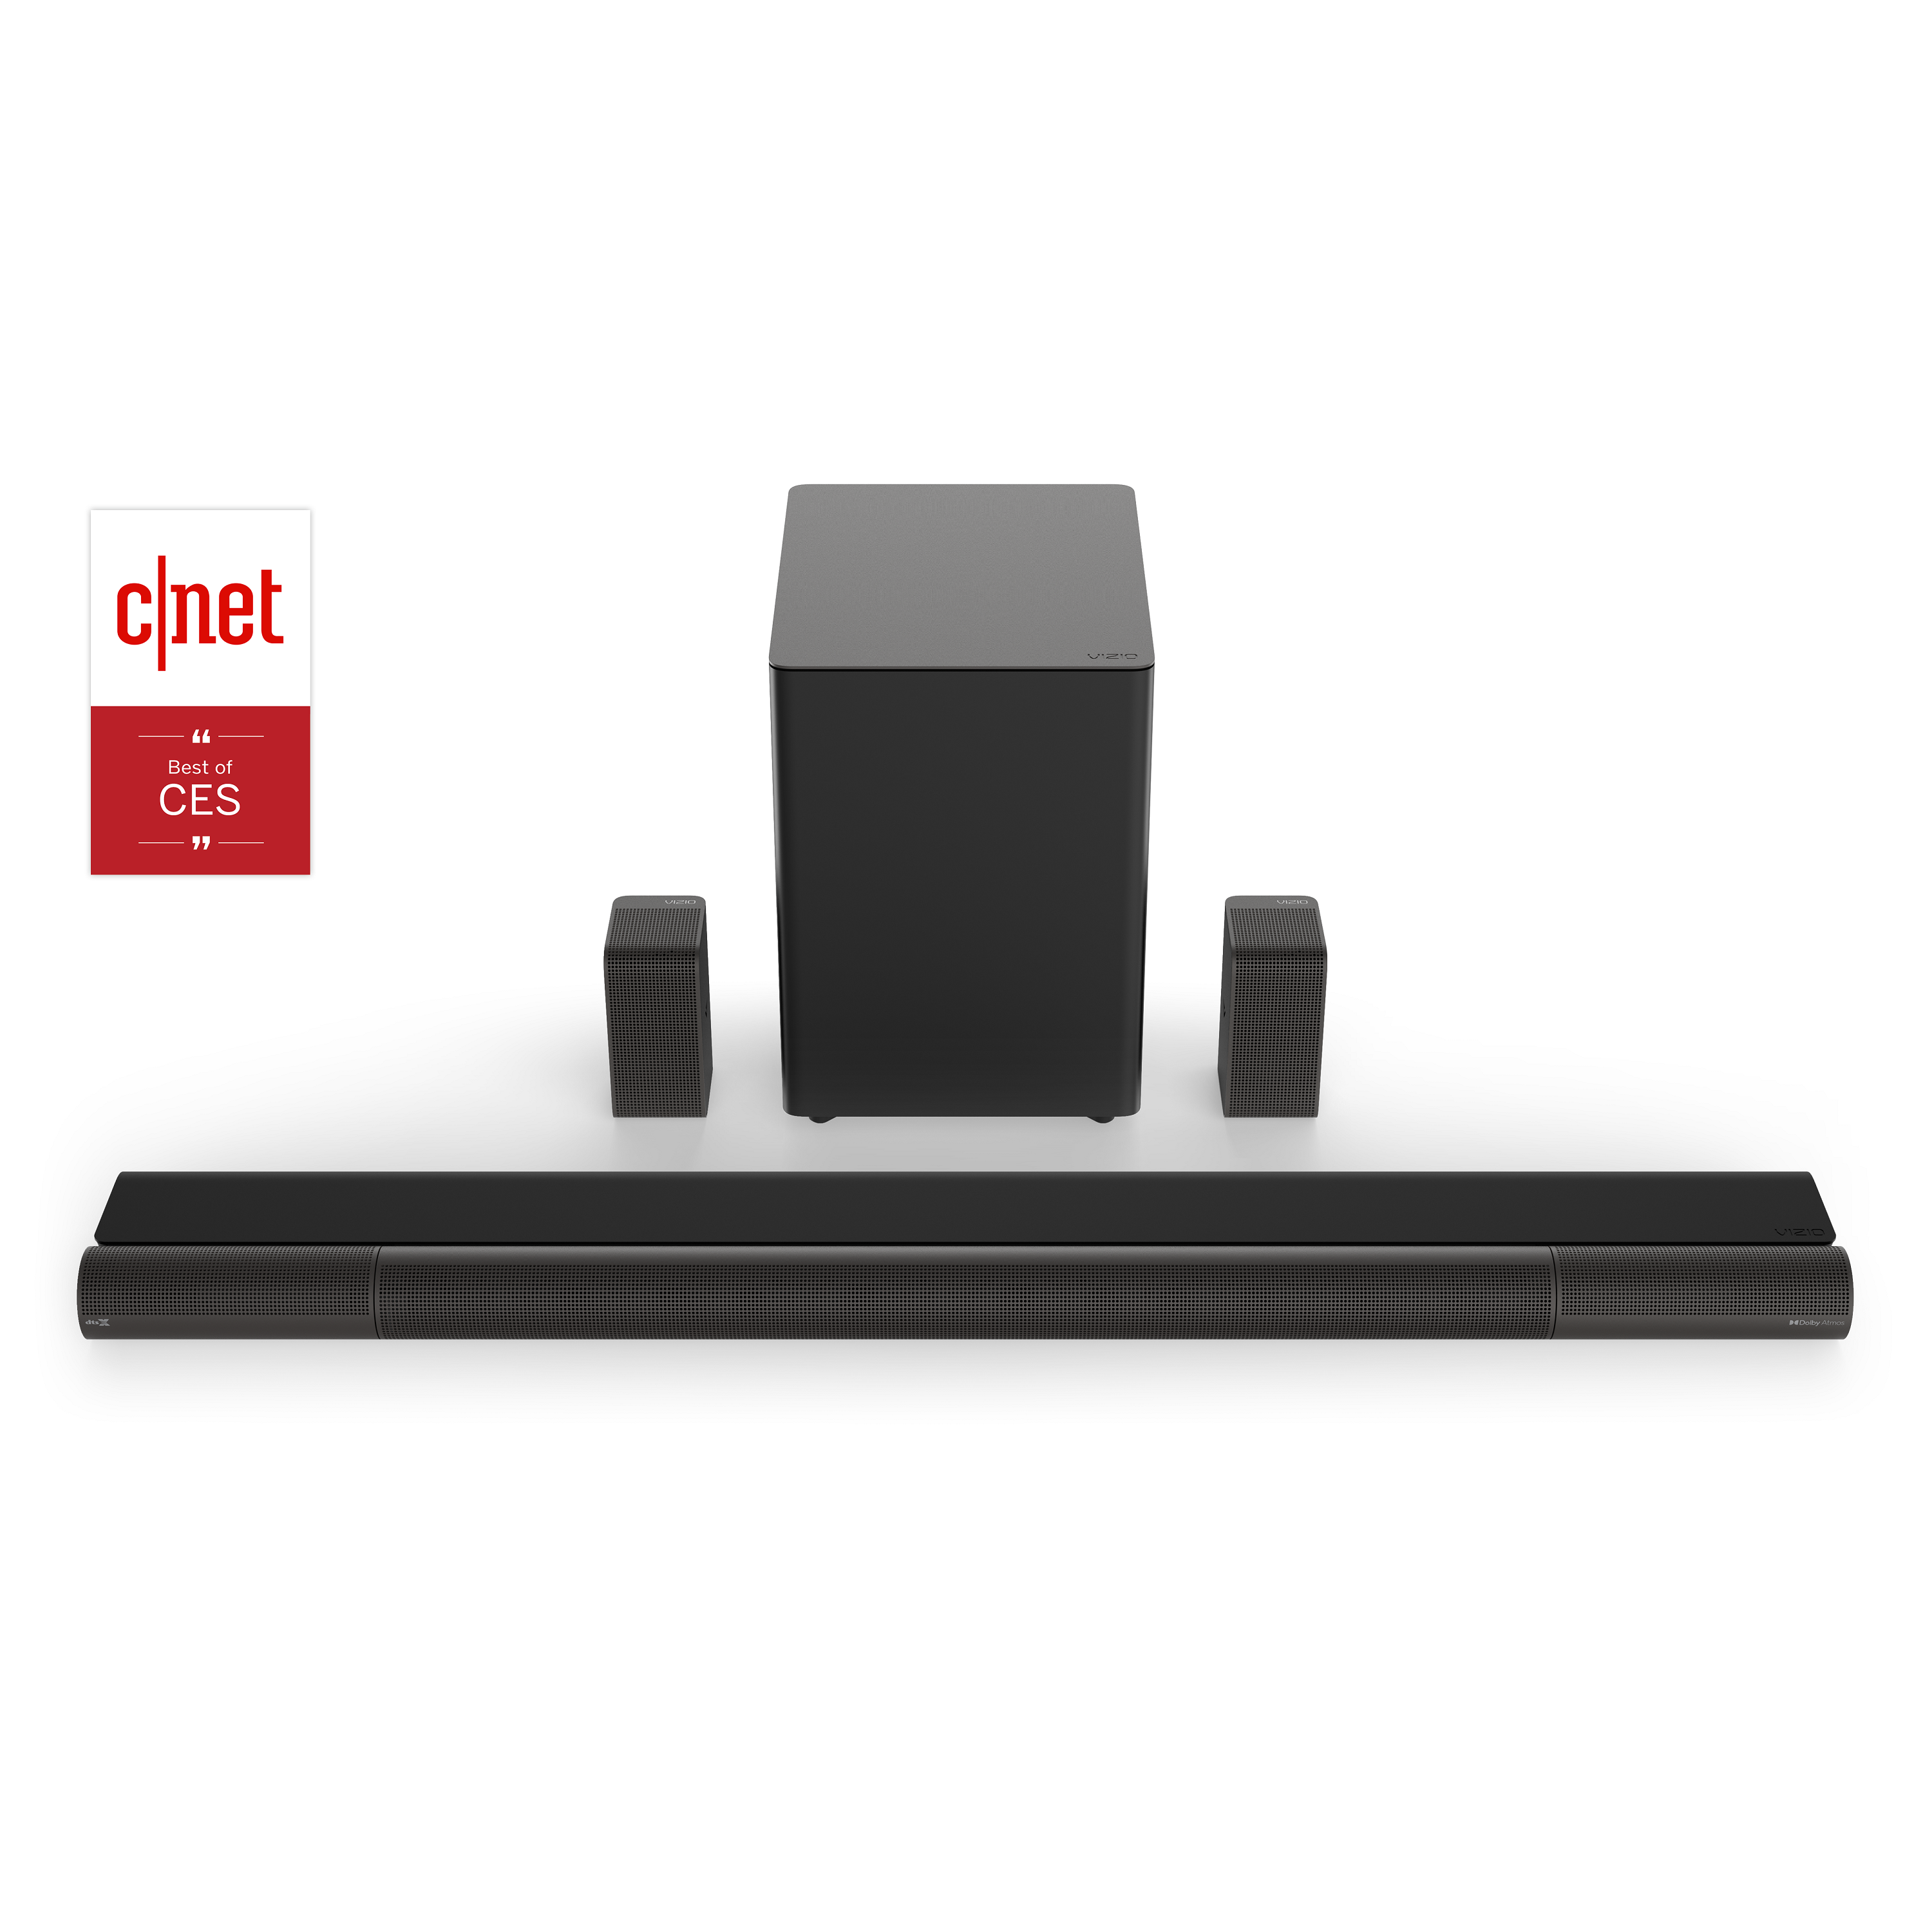 VIZIO Elevate 5.1.4 Home Theater Sound Bar with Dolby Atmos and DTS:X - P514a-H6 - image 1 of 21